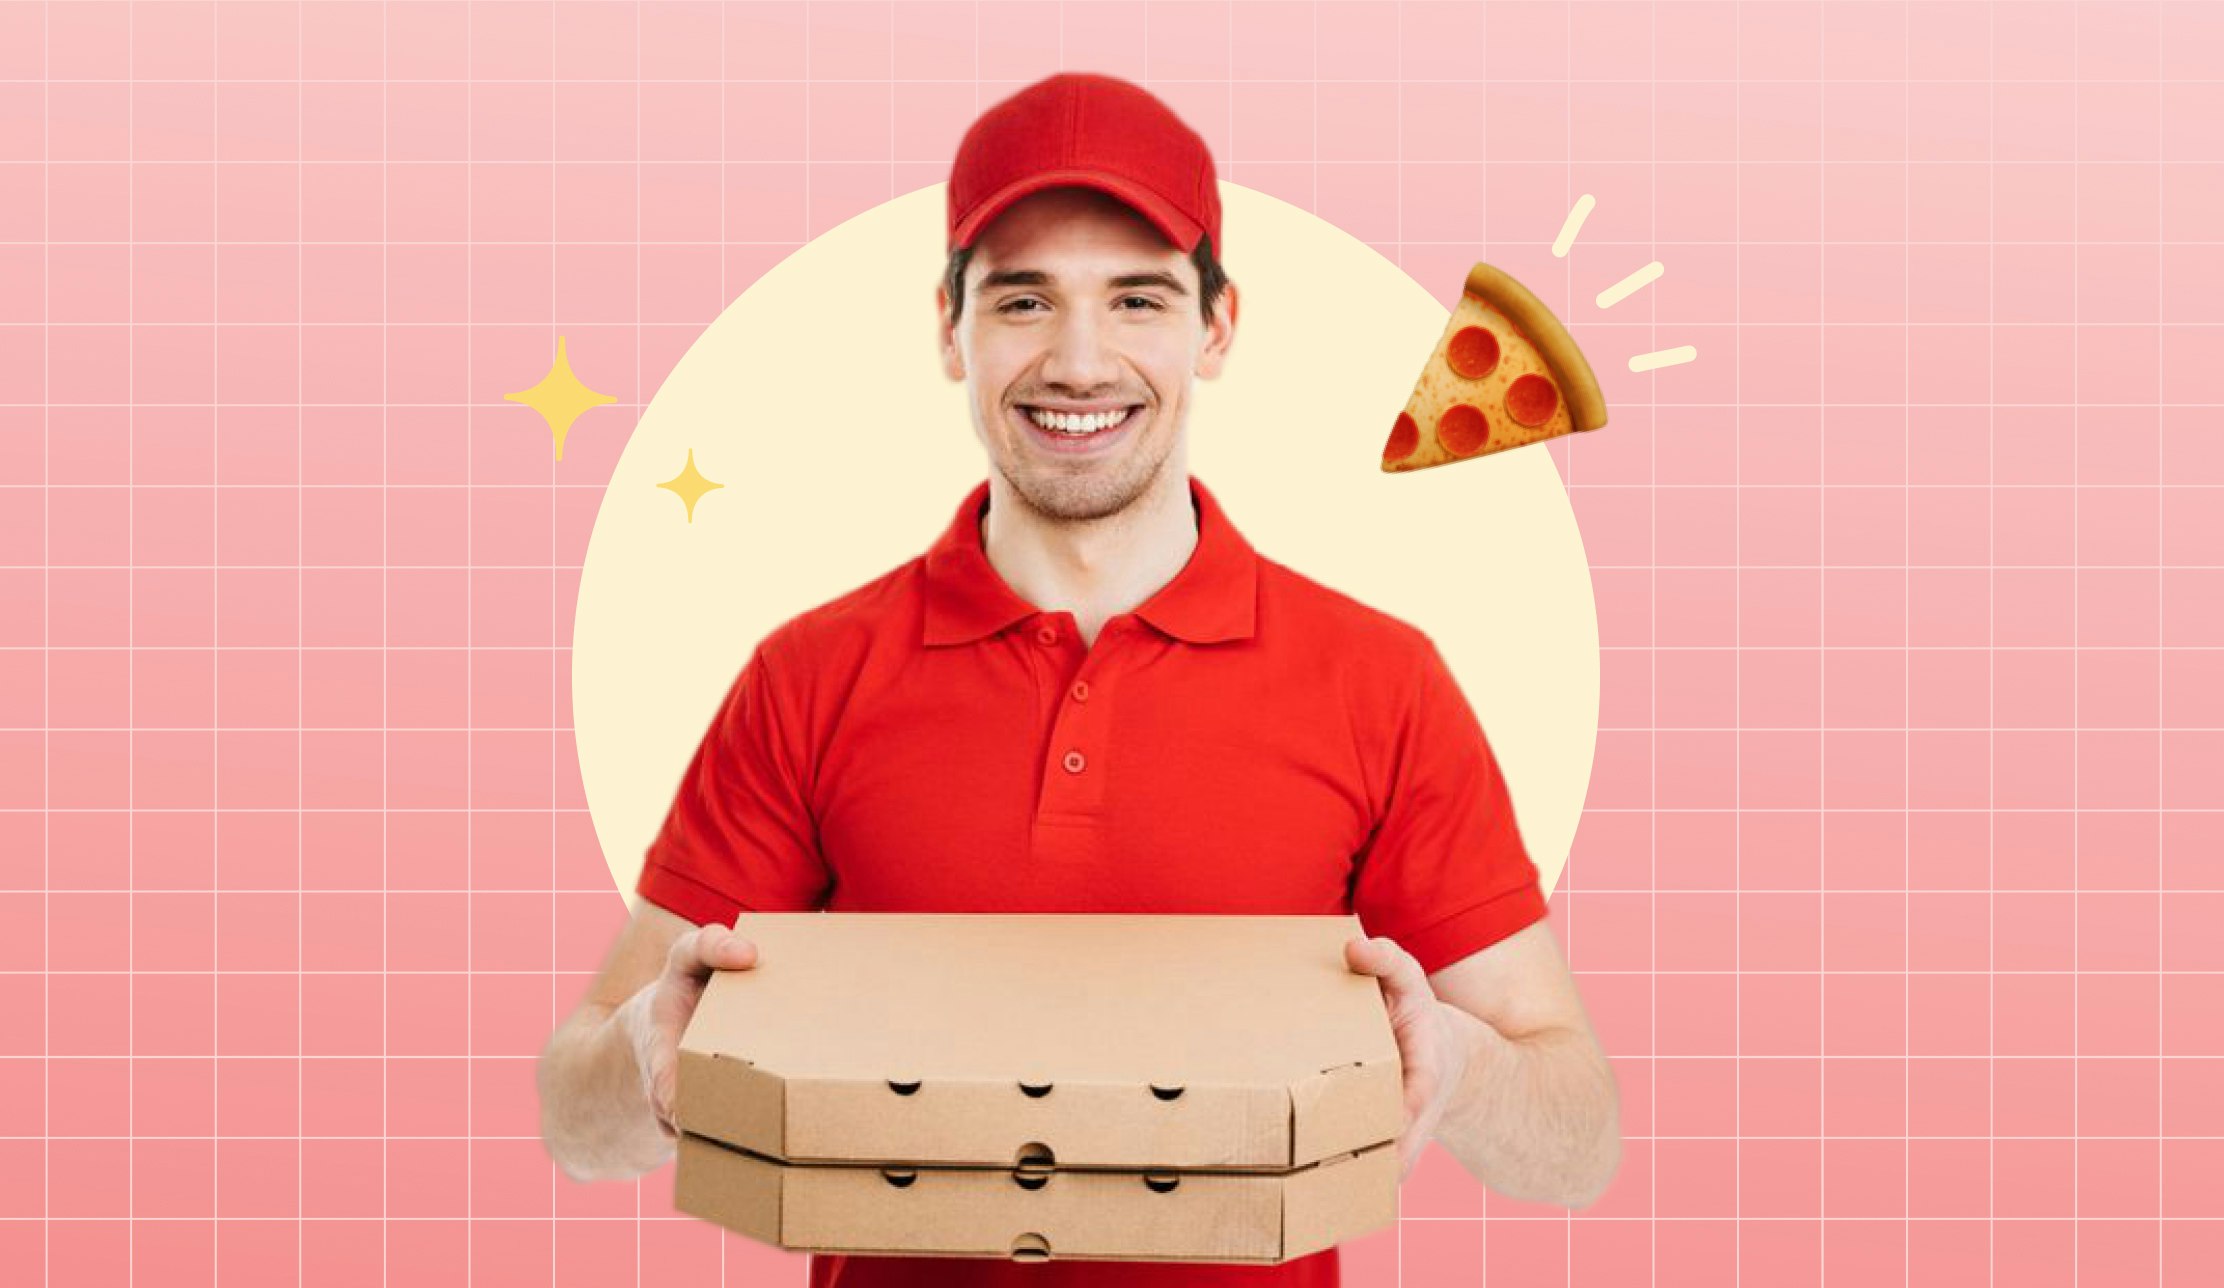 pizza delivery person with pizza boxes